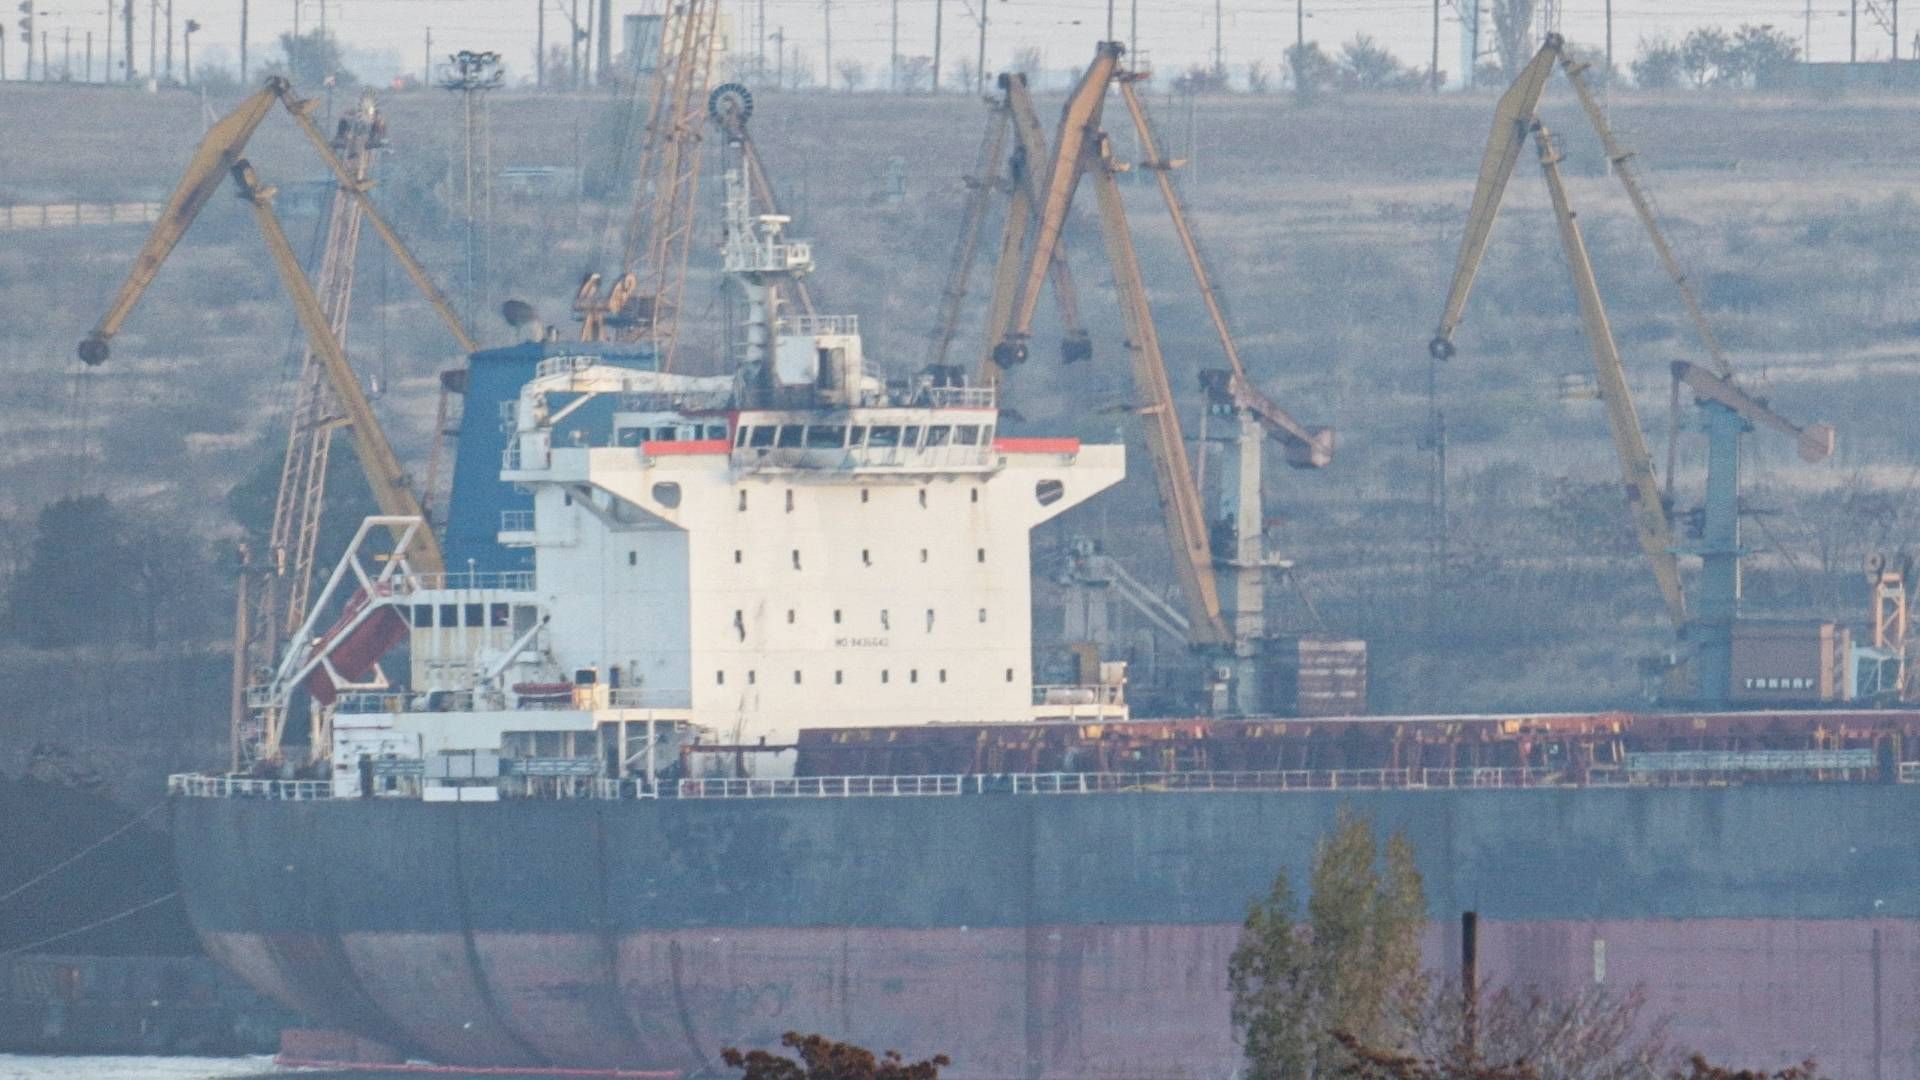 According to information from Ukraine, a dry cargo ship sailing under the Liberian flag was hit by a missile attack in the port of Pivdennyi. | Photo: Stringer